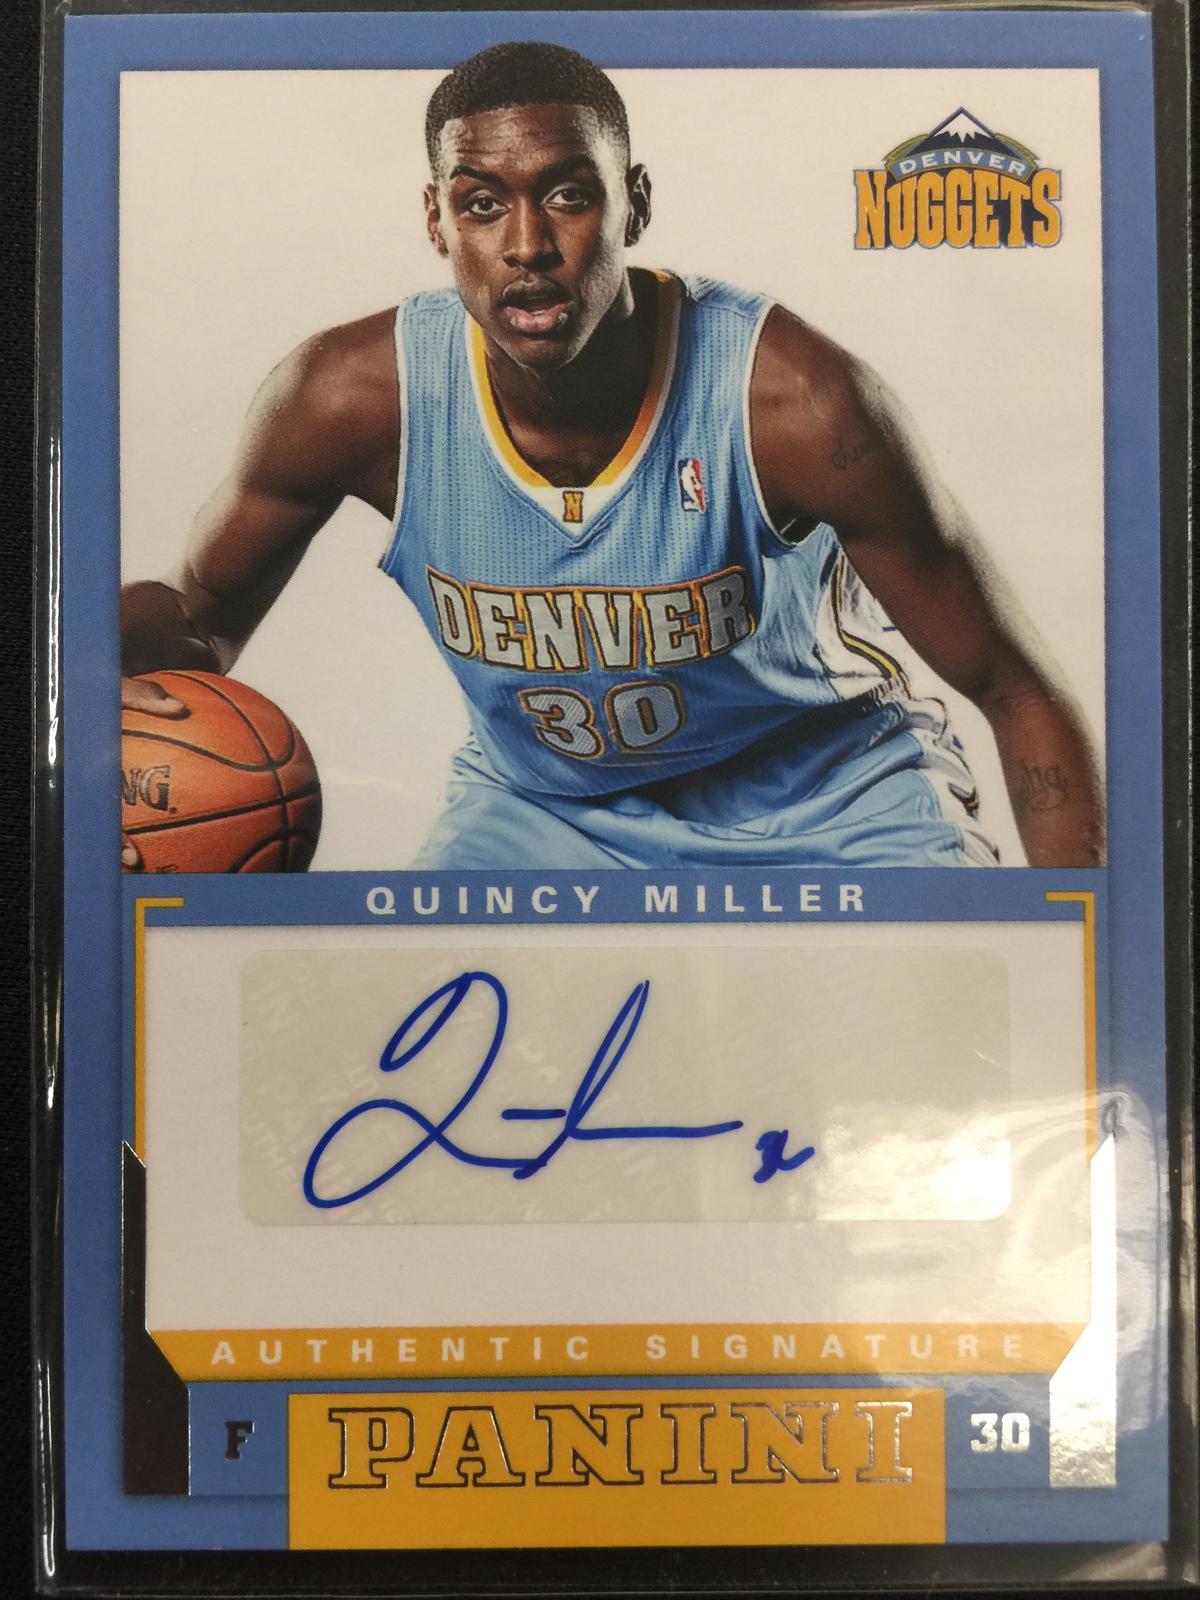 2012/13 Panini Quincy Miller Nuggets Rookie Autograph Card